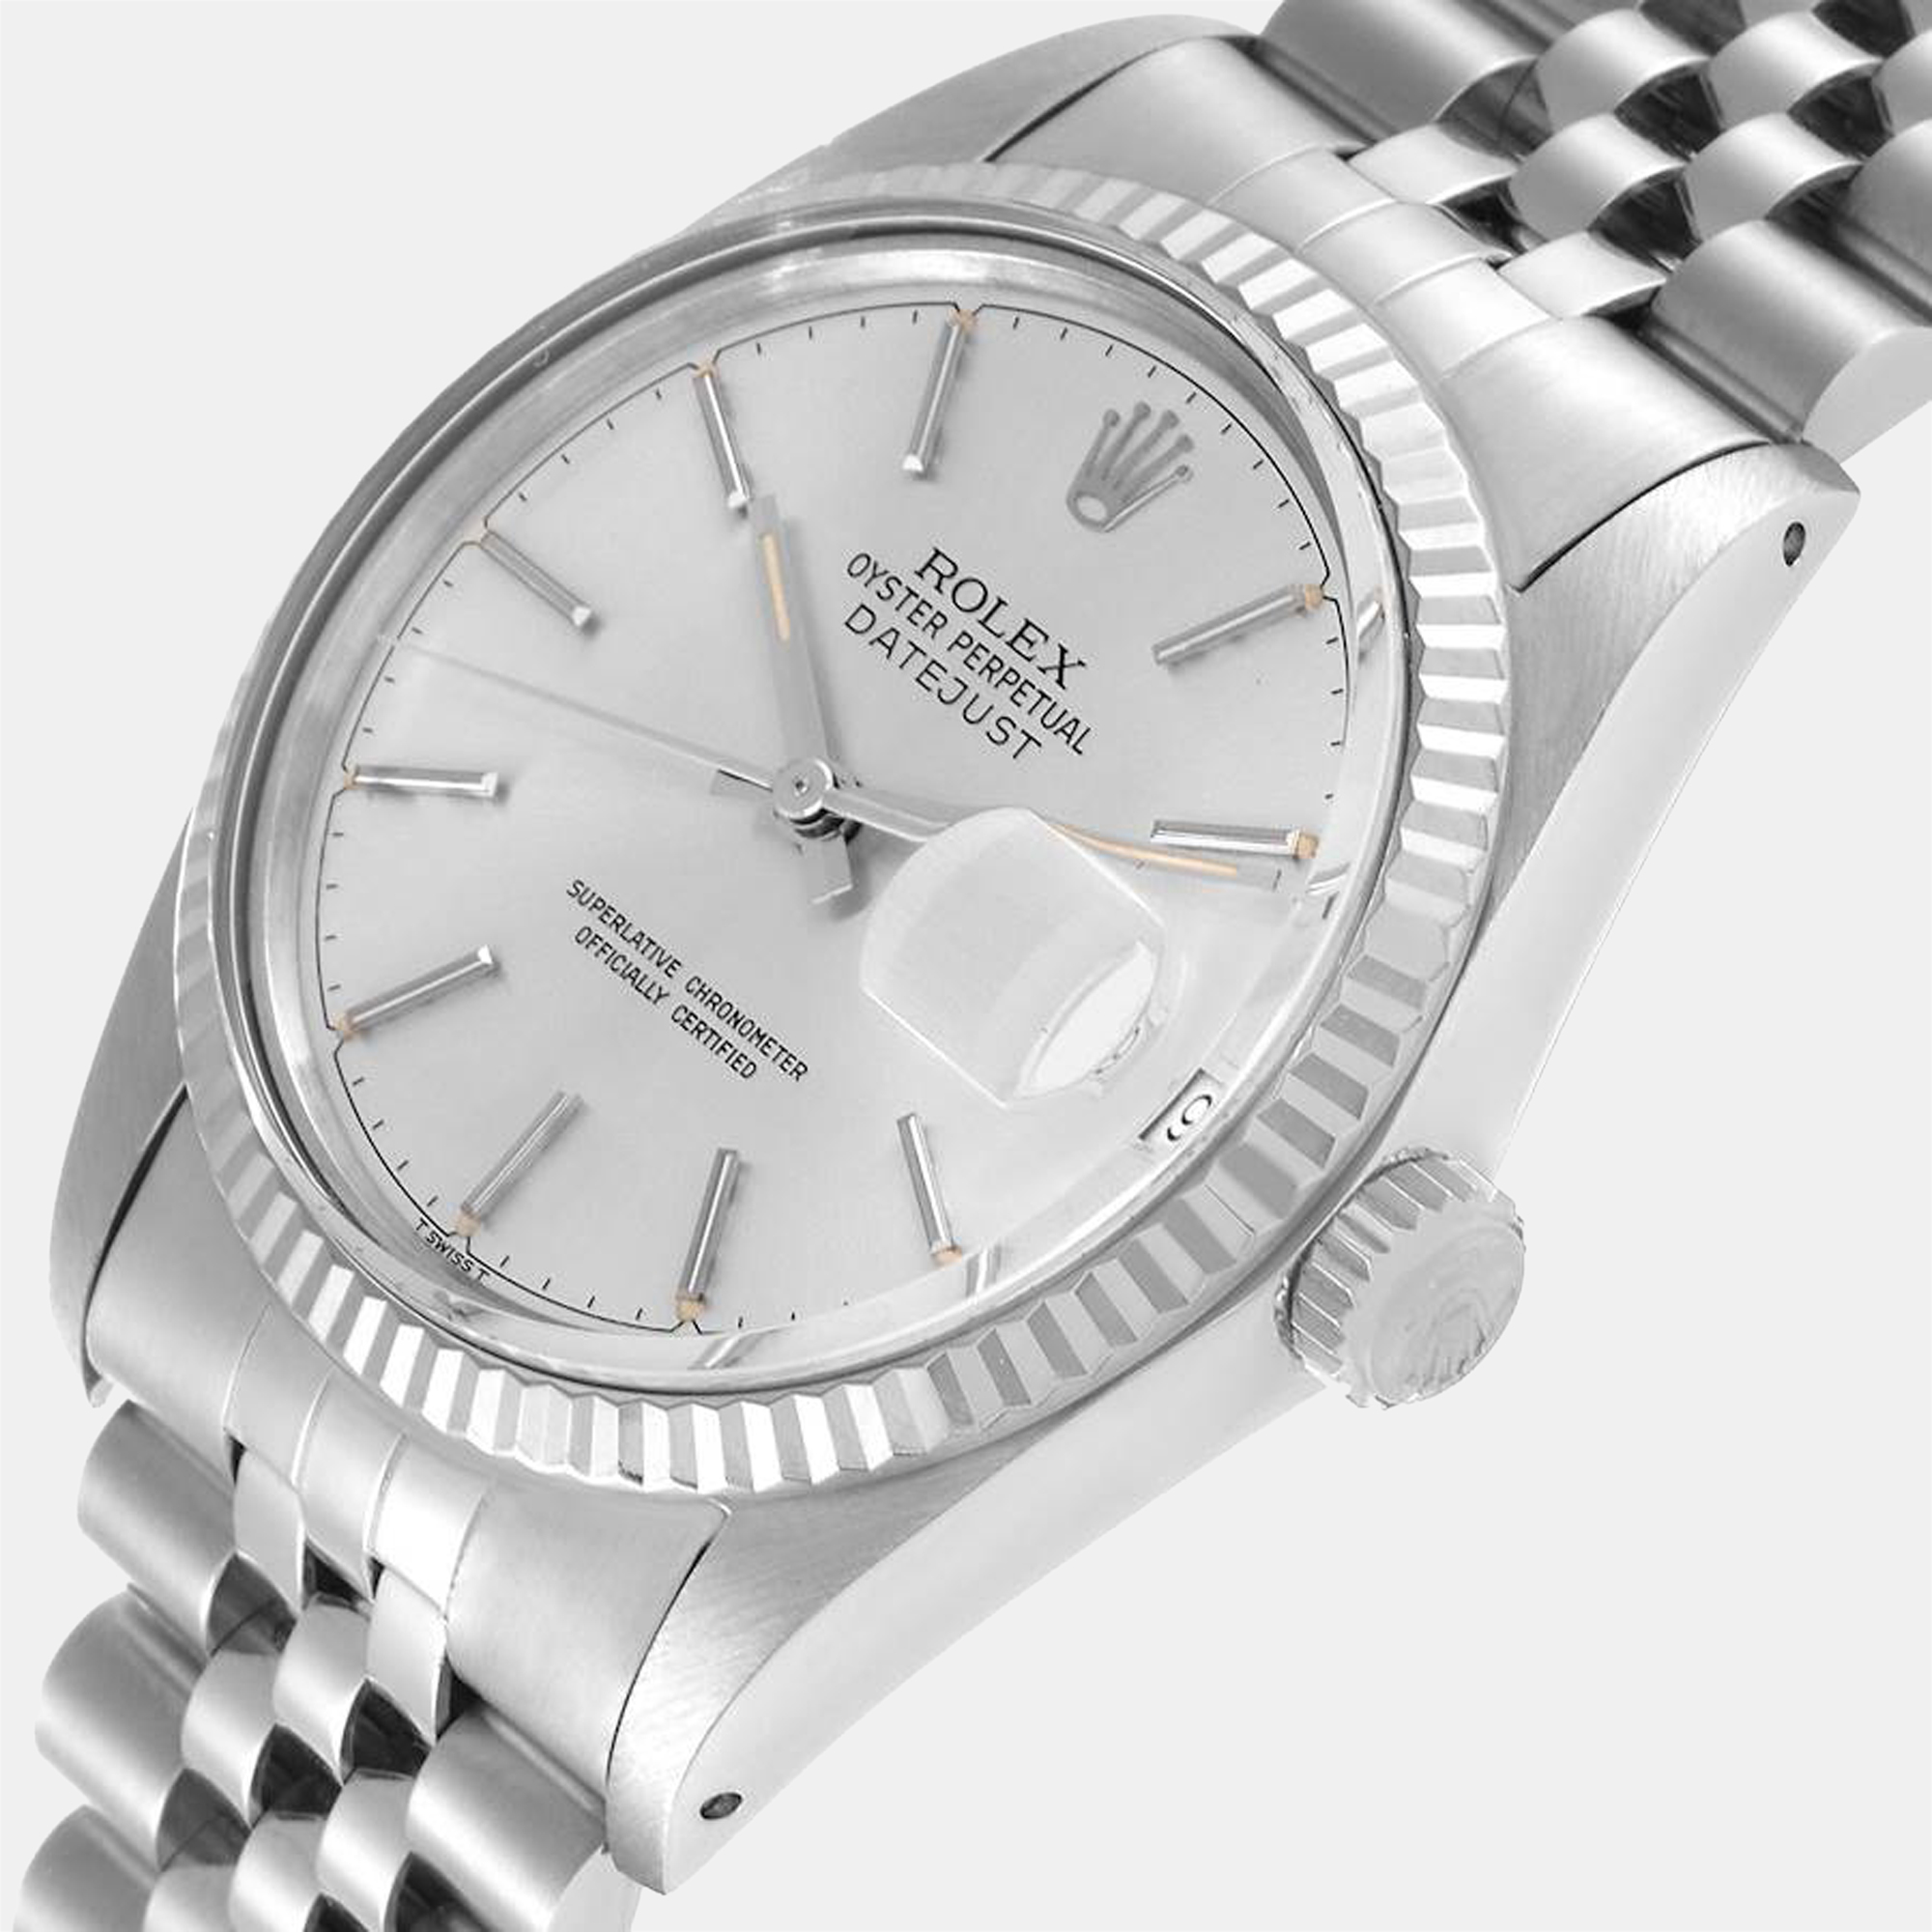 

Rolex Silver 18K White Gold And Stainless Steel Datejust 16014 Automatic Men's Wristwatch 36 mm